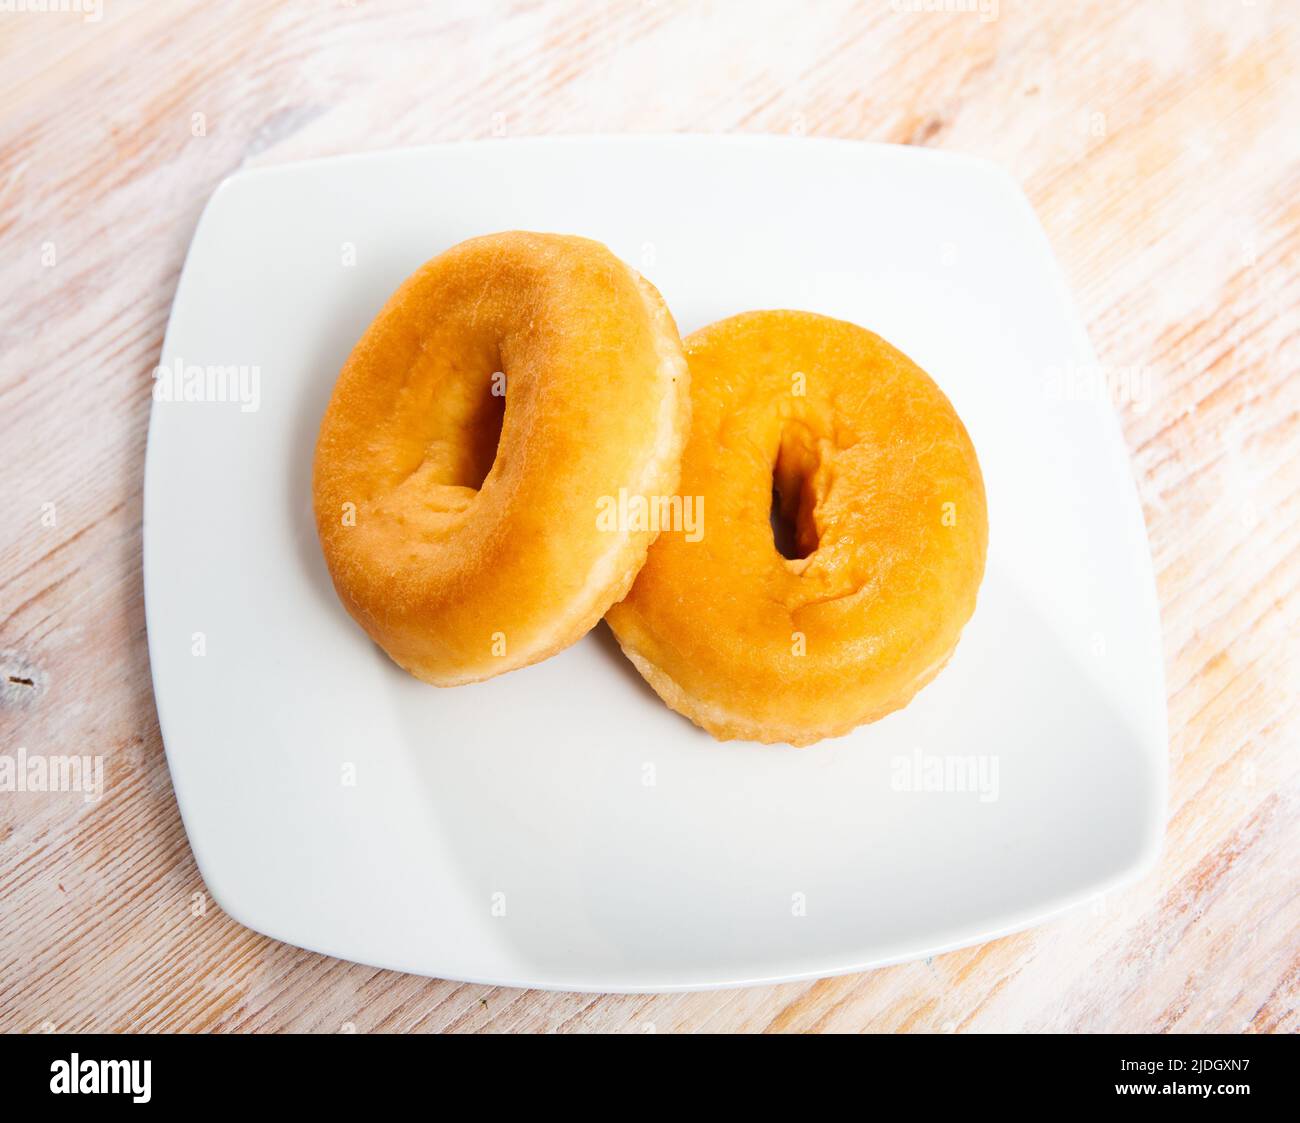 Two tasty donuts on wooden table Stock Photo